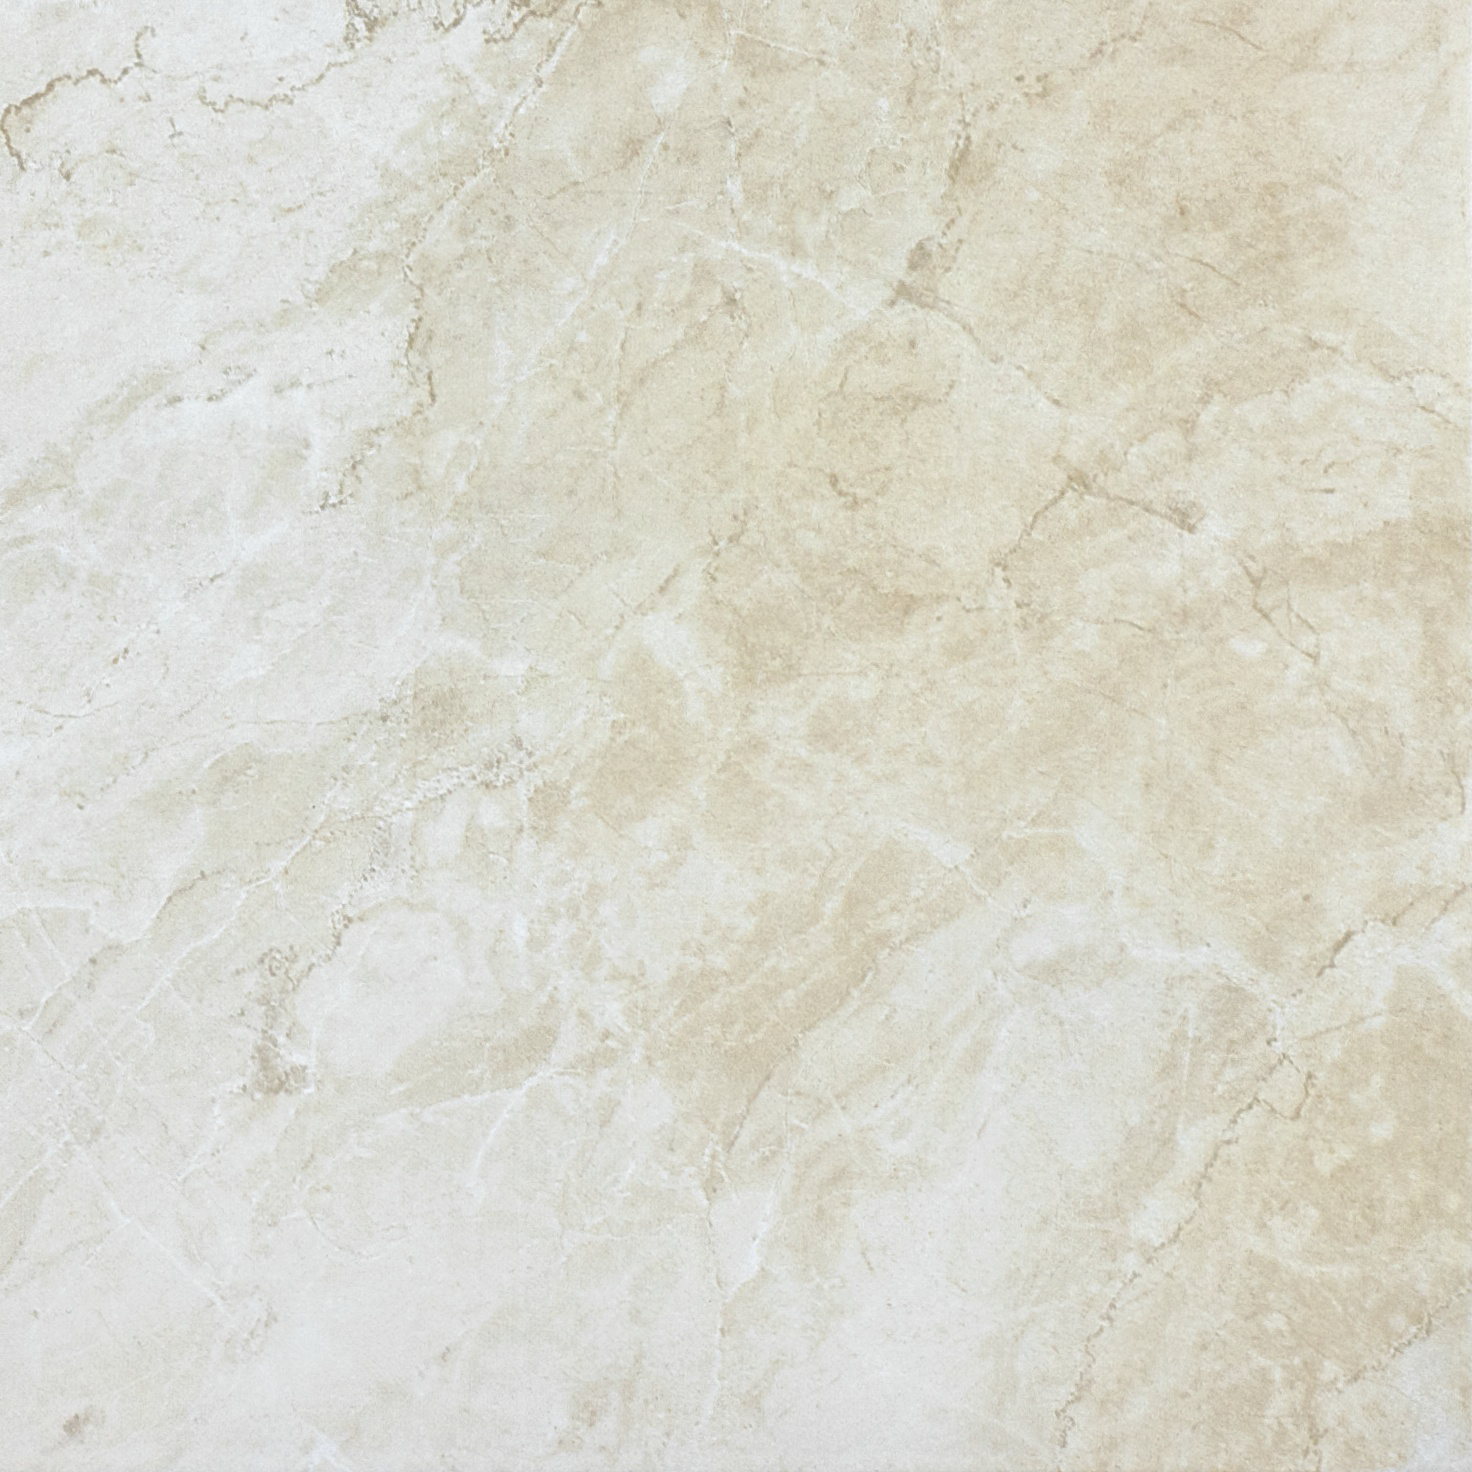 ivory pattern glazed ceramic field tile from malena anatolia collection distributed by surface group international matte finish pressed edge 13x13 square shape